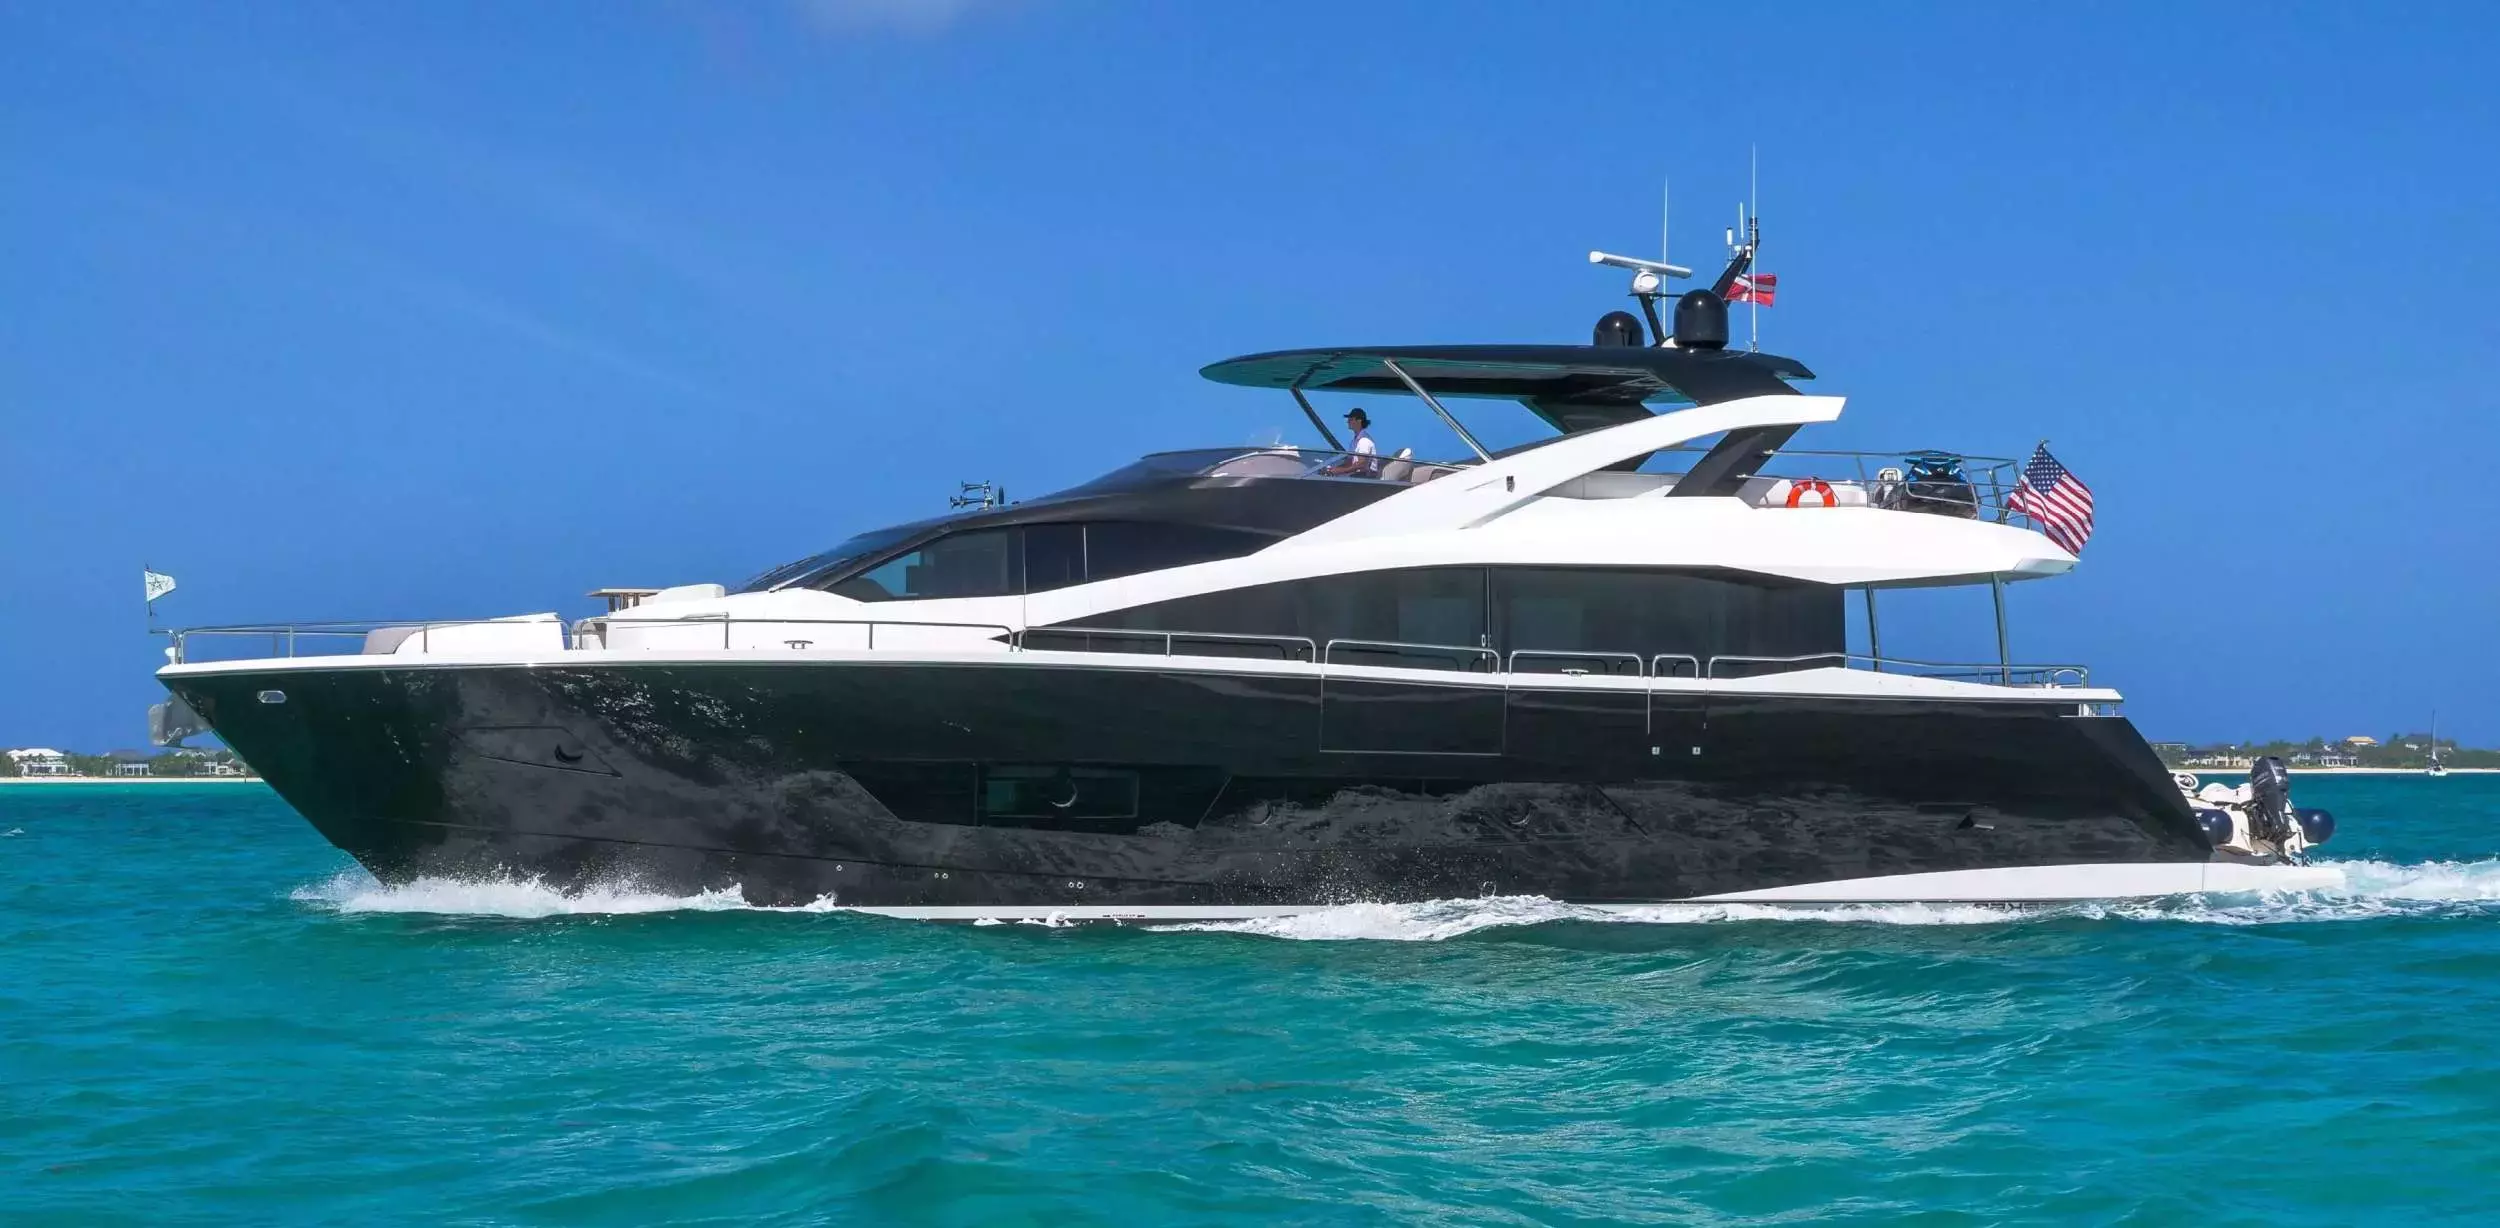 Synergy by Sunseeker - Top rates for a Charter of a private Motor Yacht in St Barths